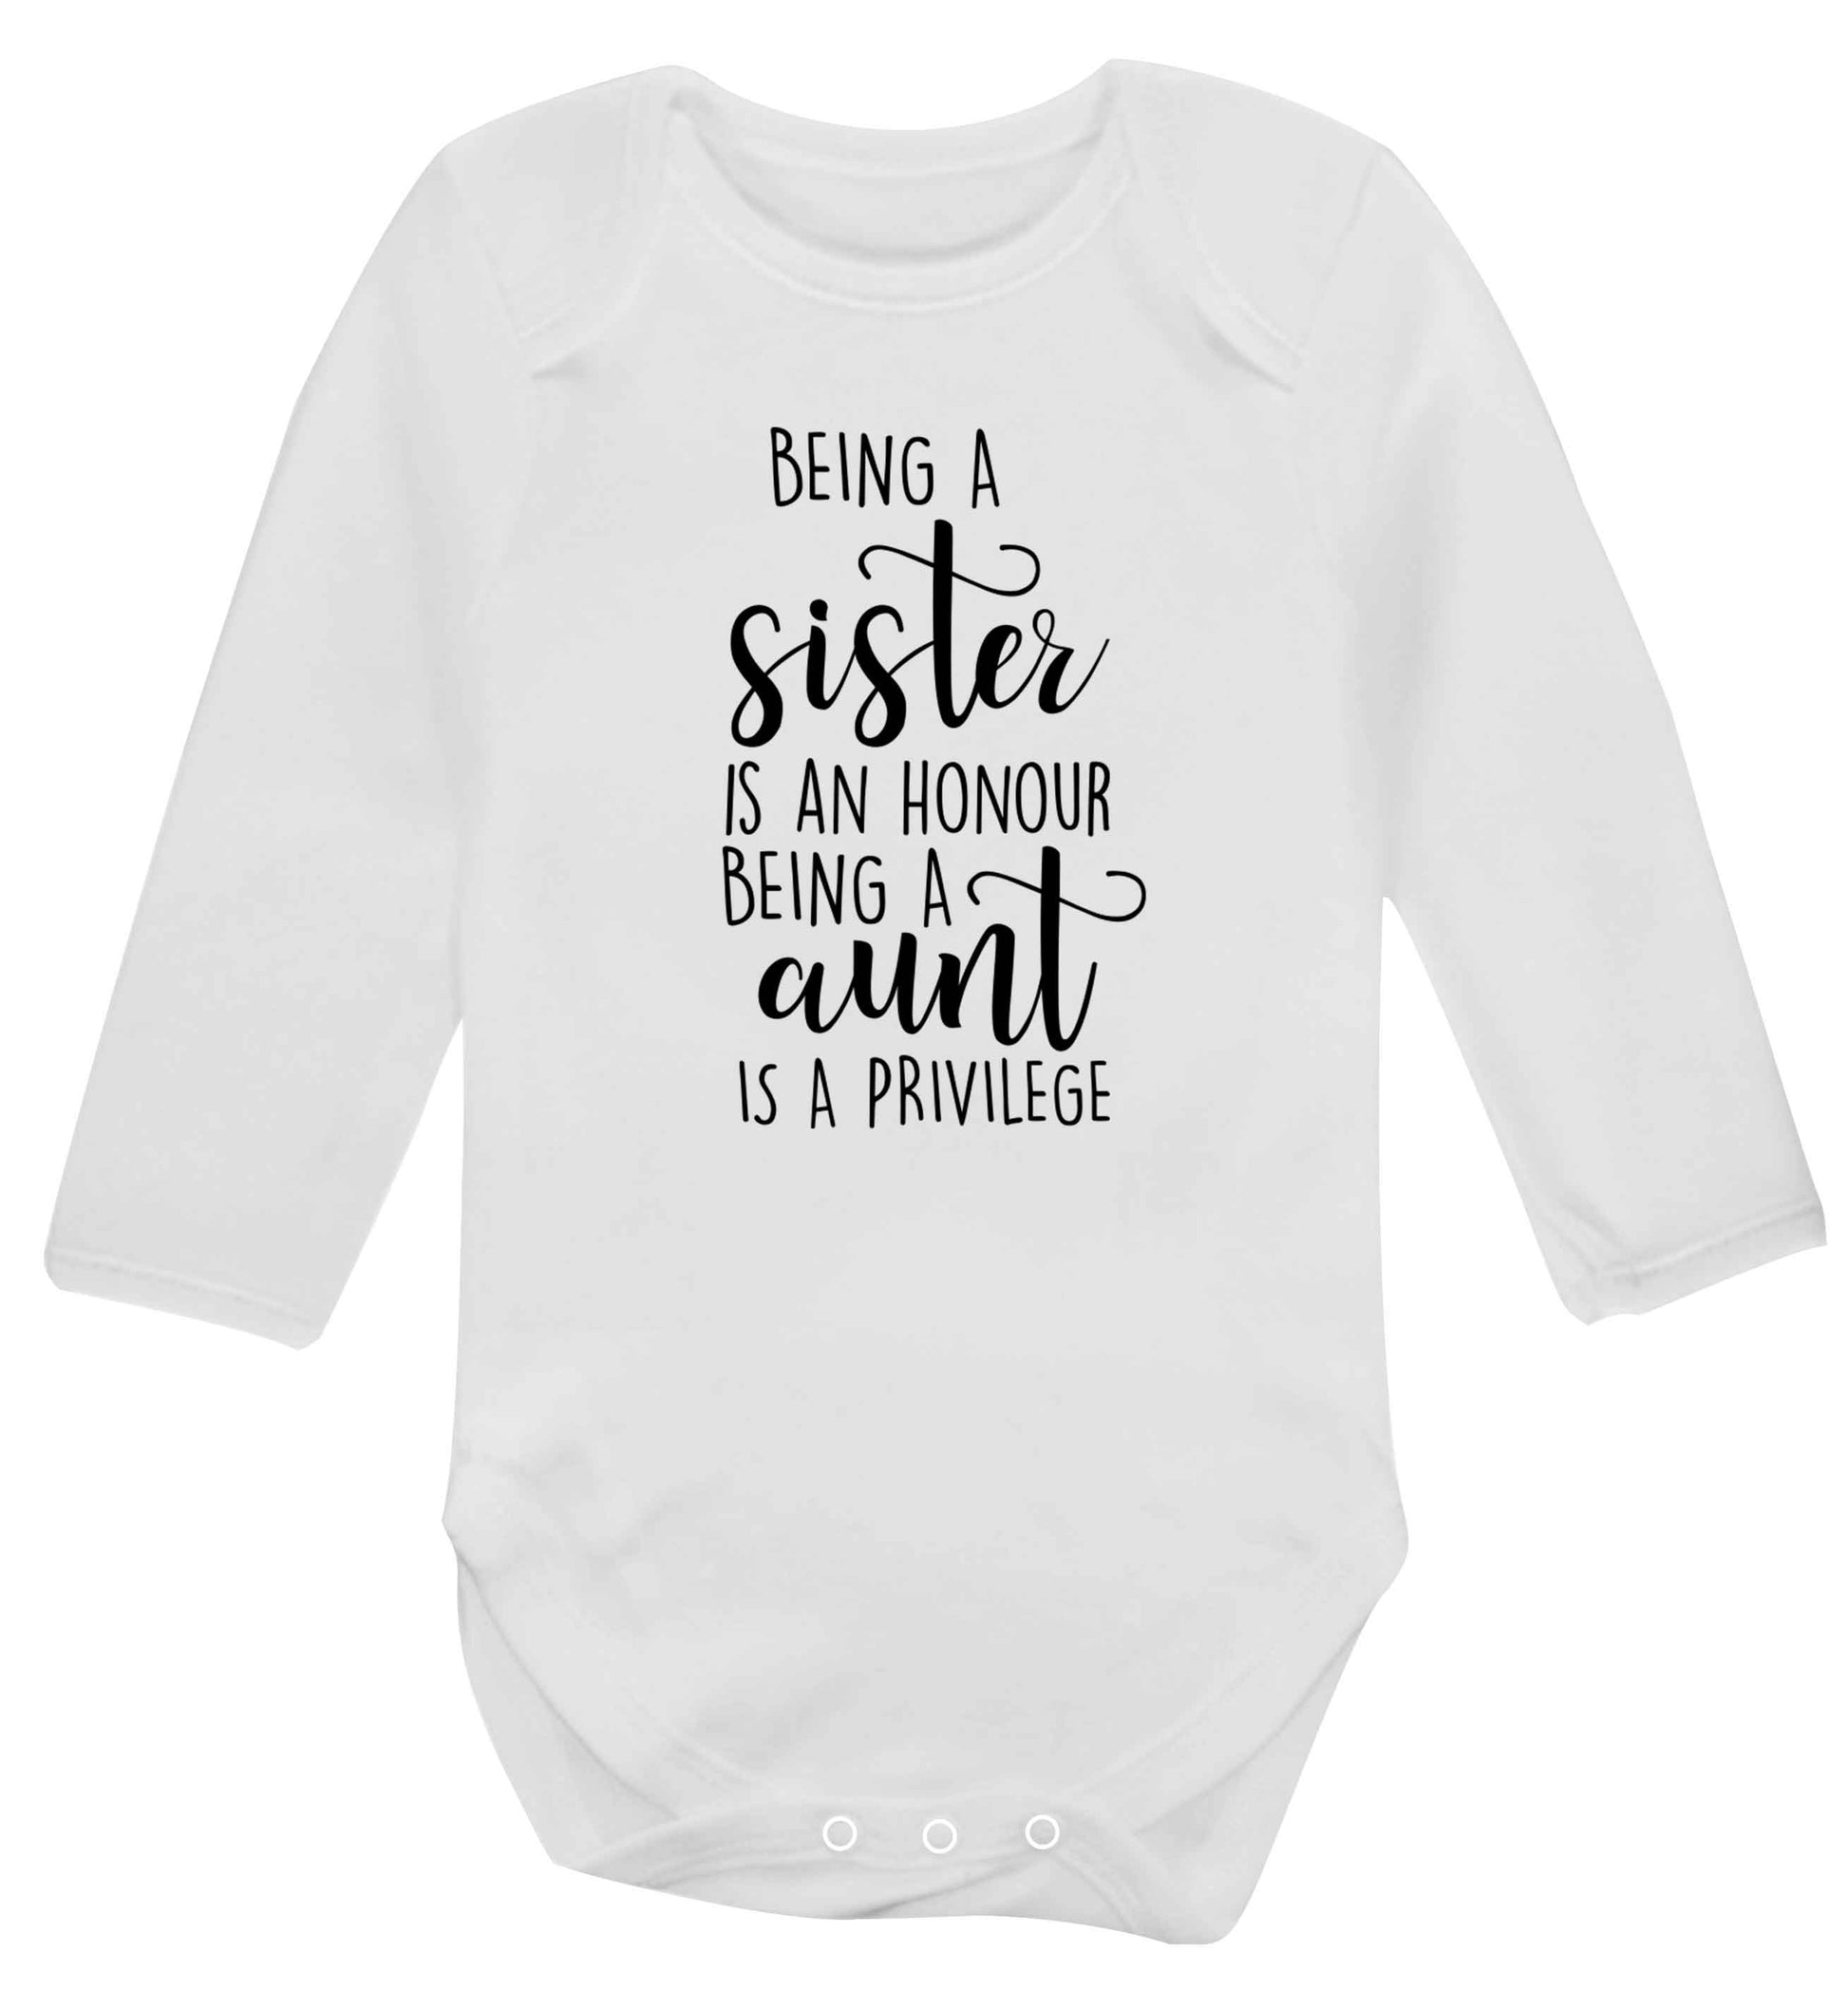 Being a sister is an honour being an auntie is a privilege Baby Vest long sleeved white 6-12 months